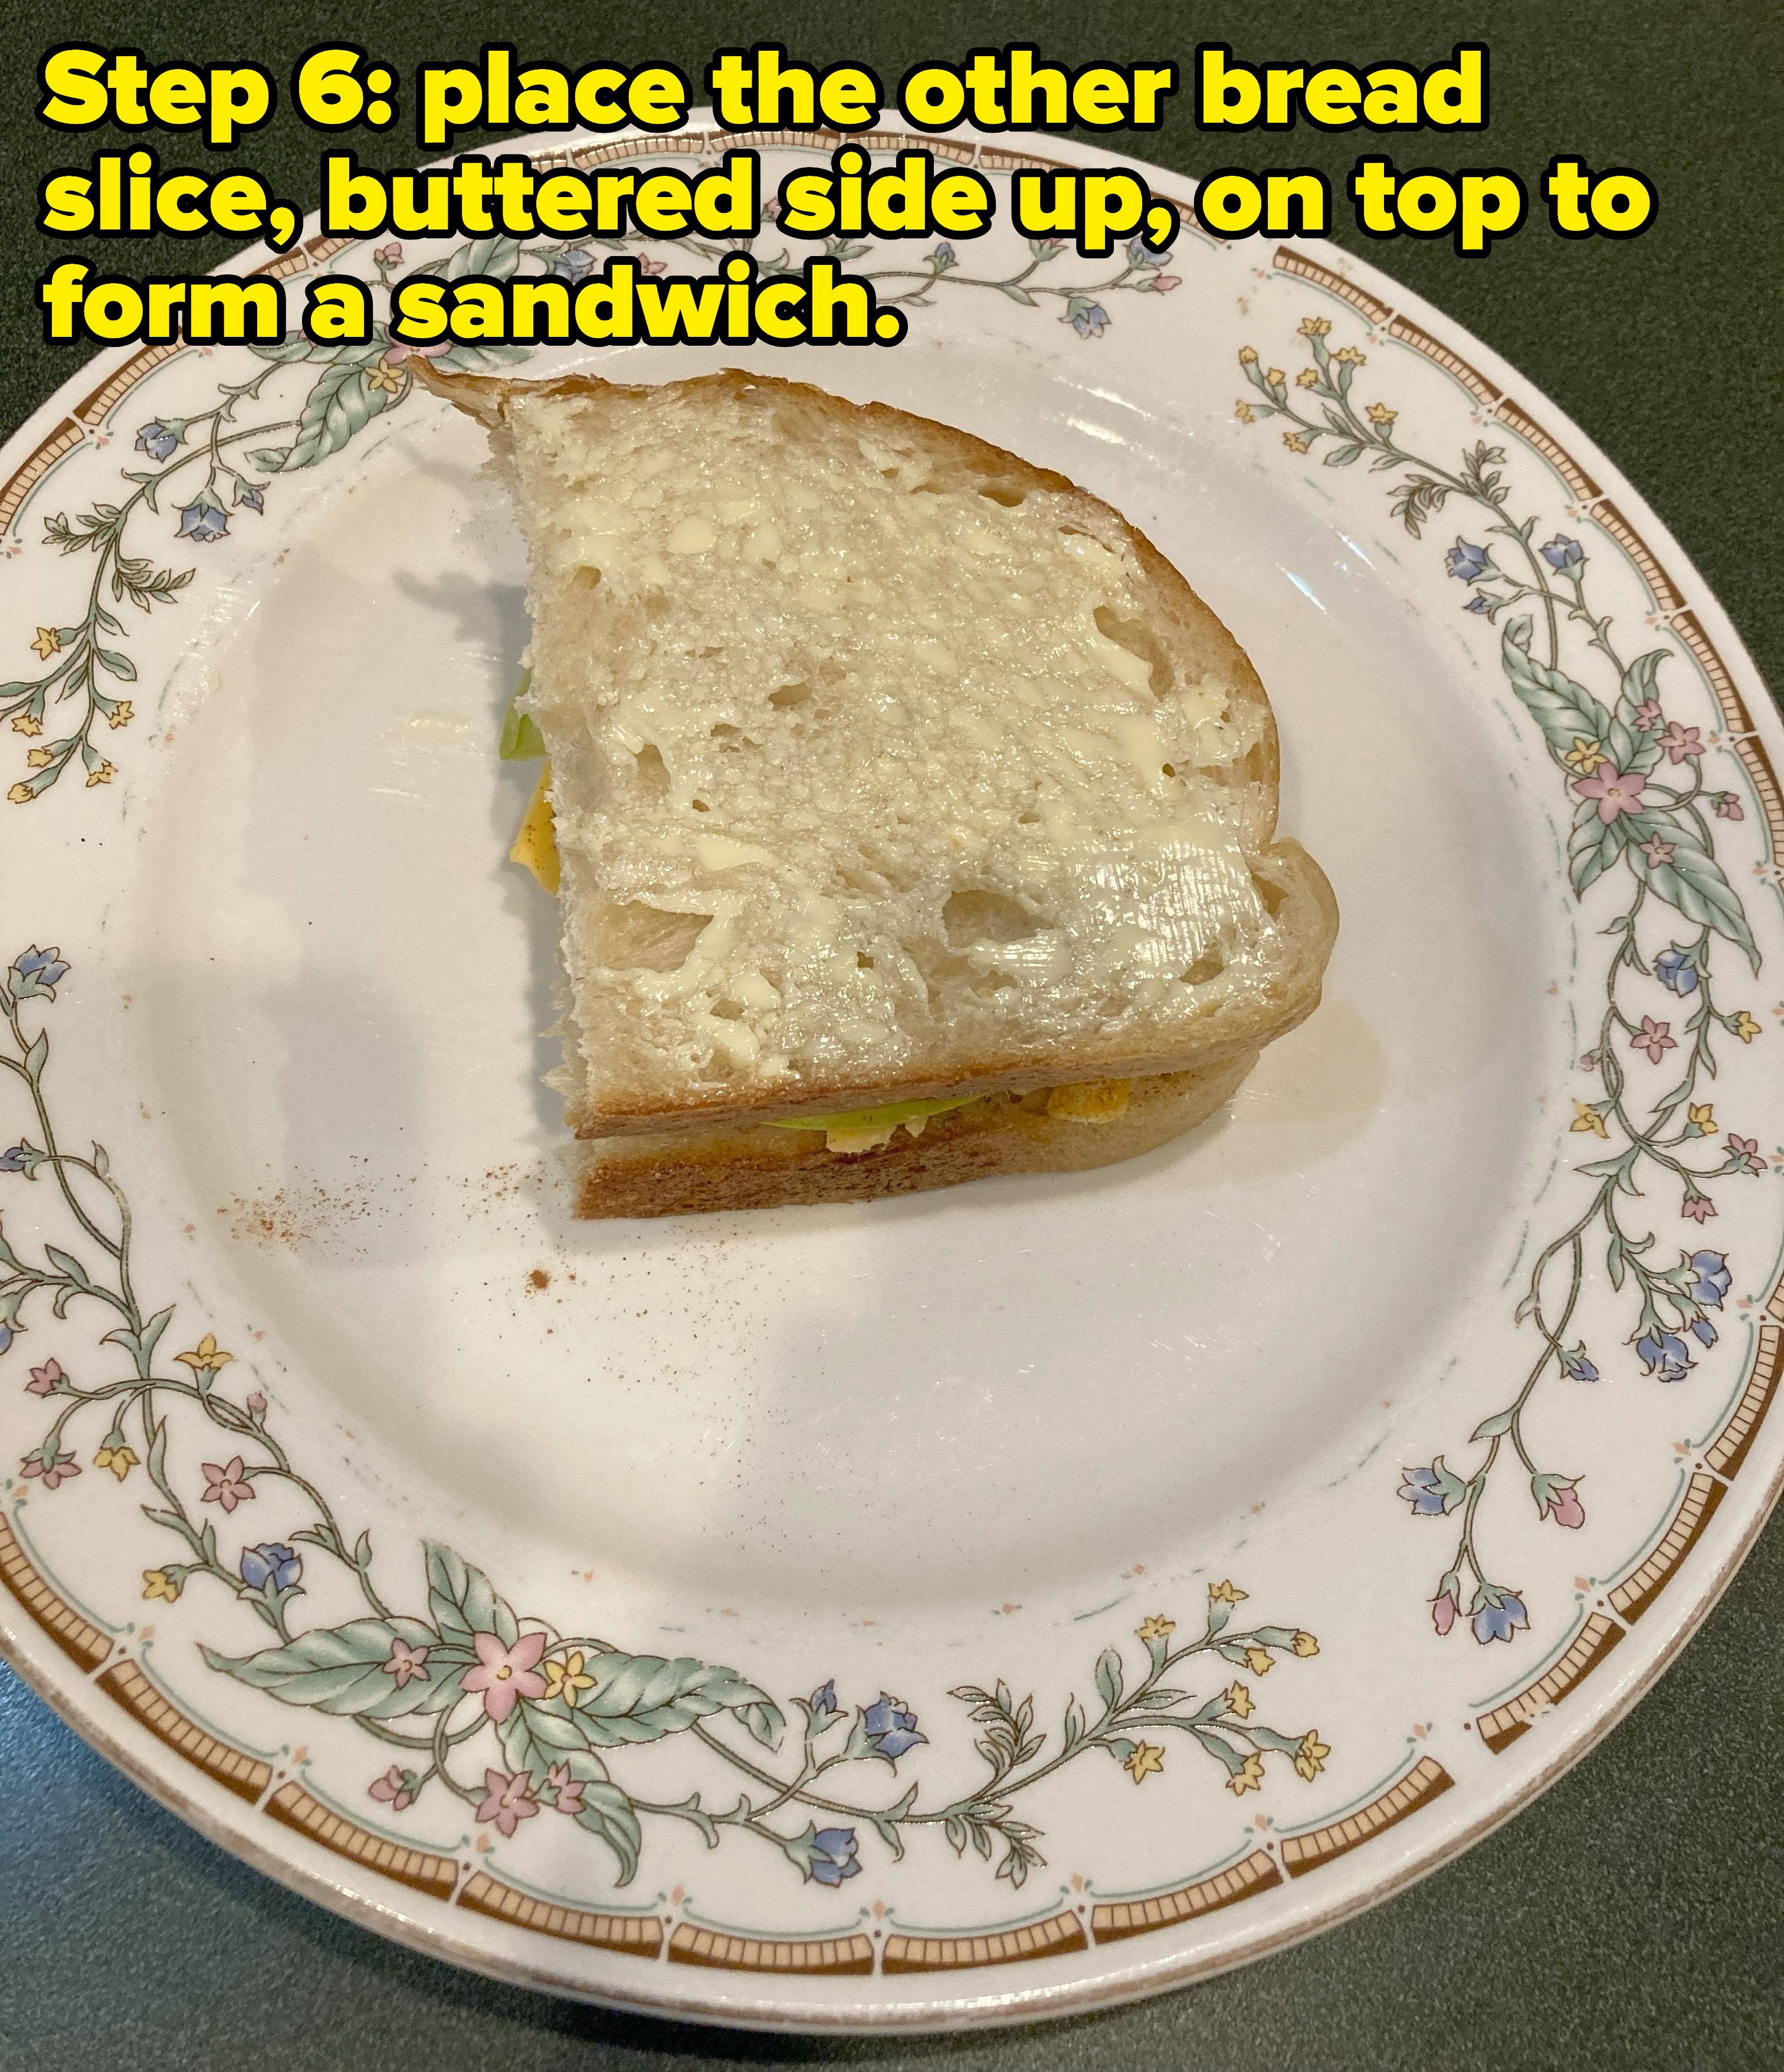 photo of step 6 with the the words &quot;place the other bread slice, buttered side up, on top to form a sandwich